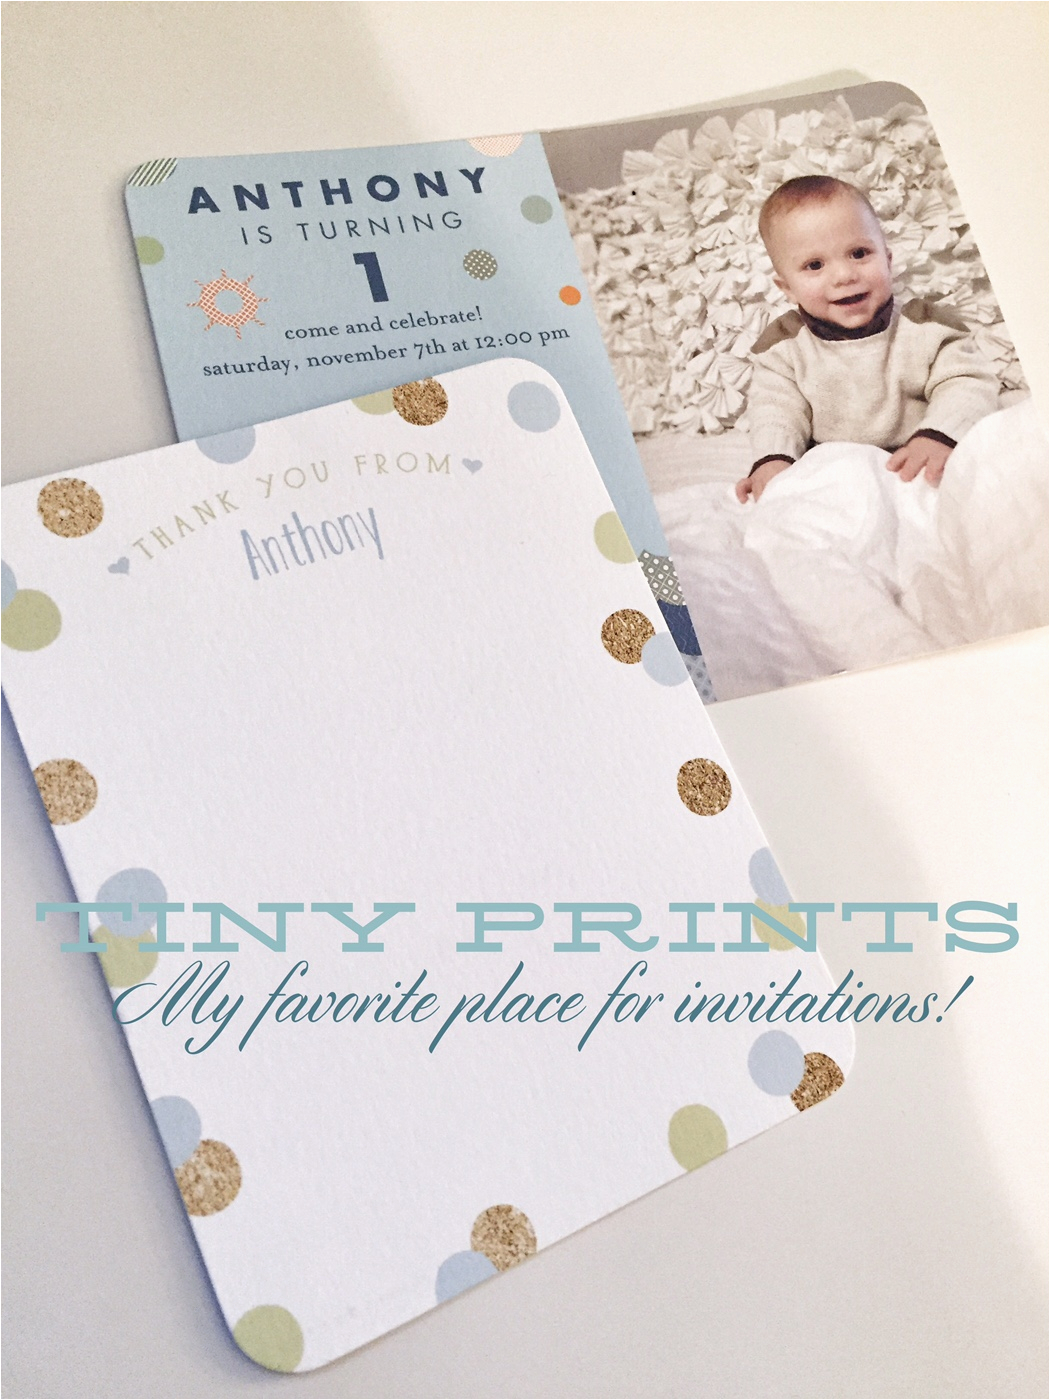 tiny prints are the only invitation i choose for special